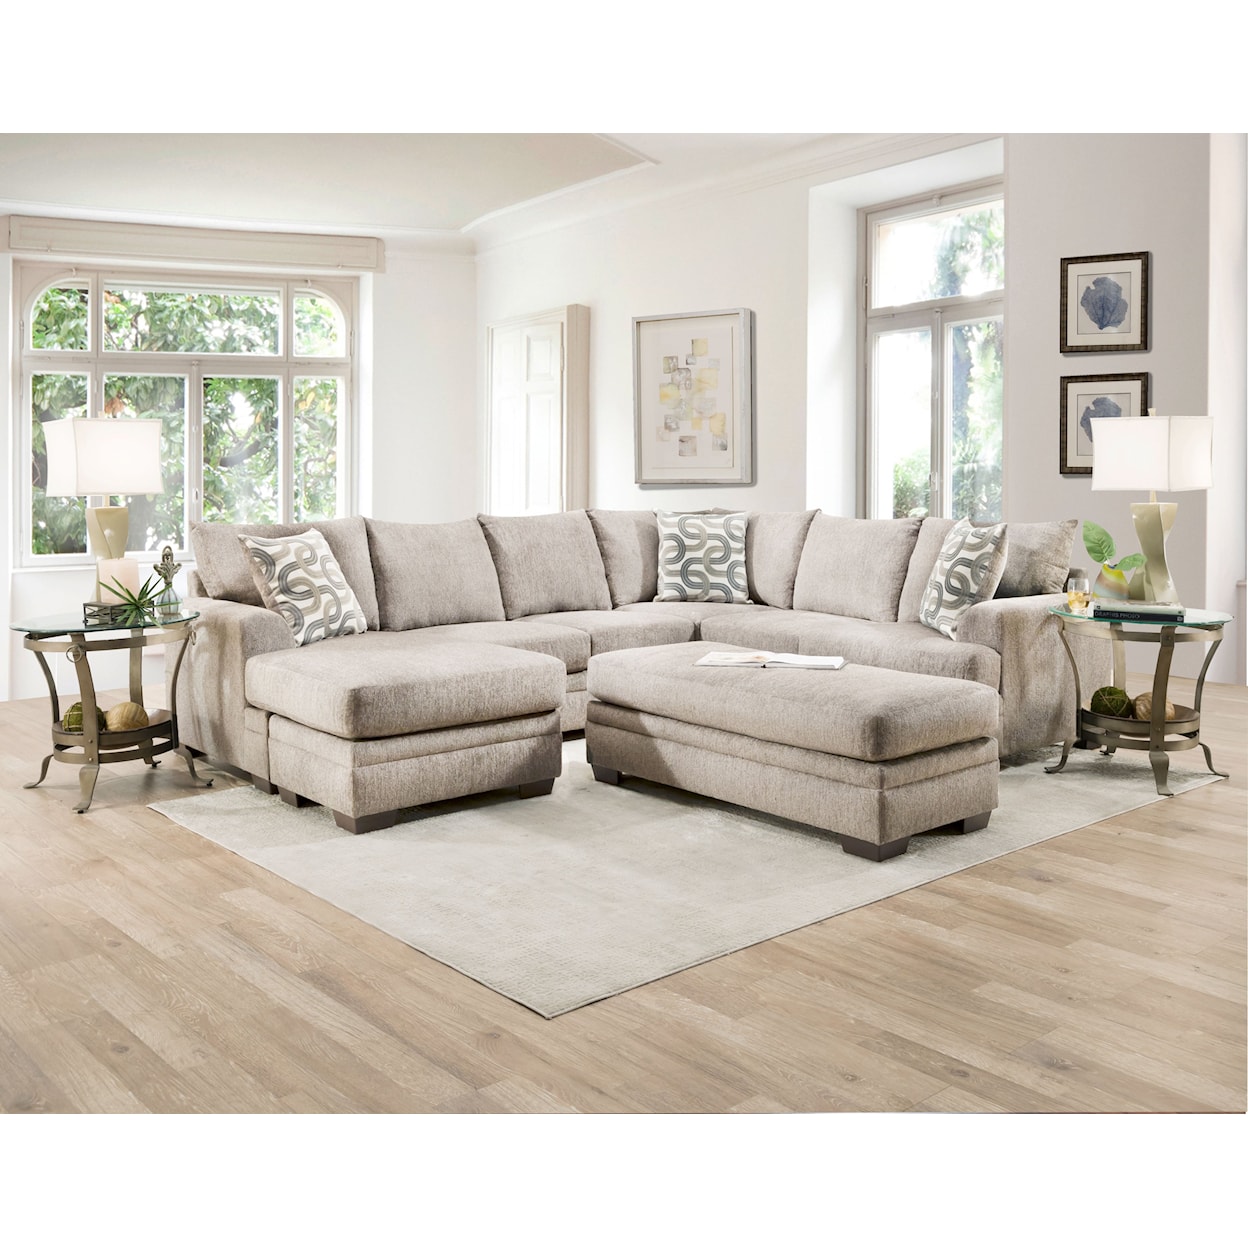 Behold Home 1310 Bailey Sectional Sofa with Ottoman